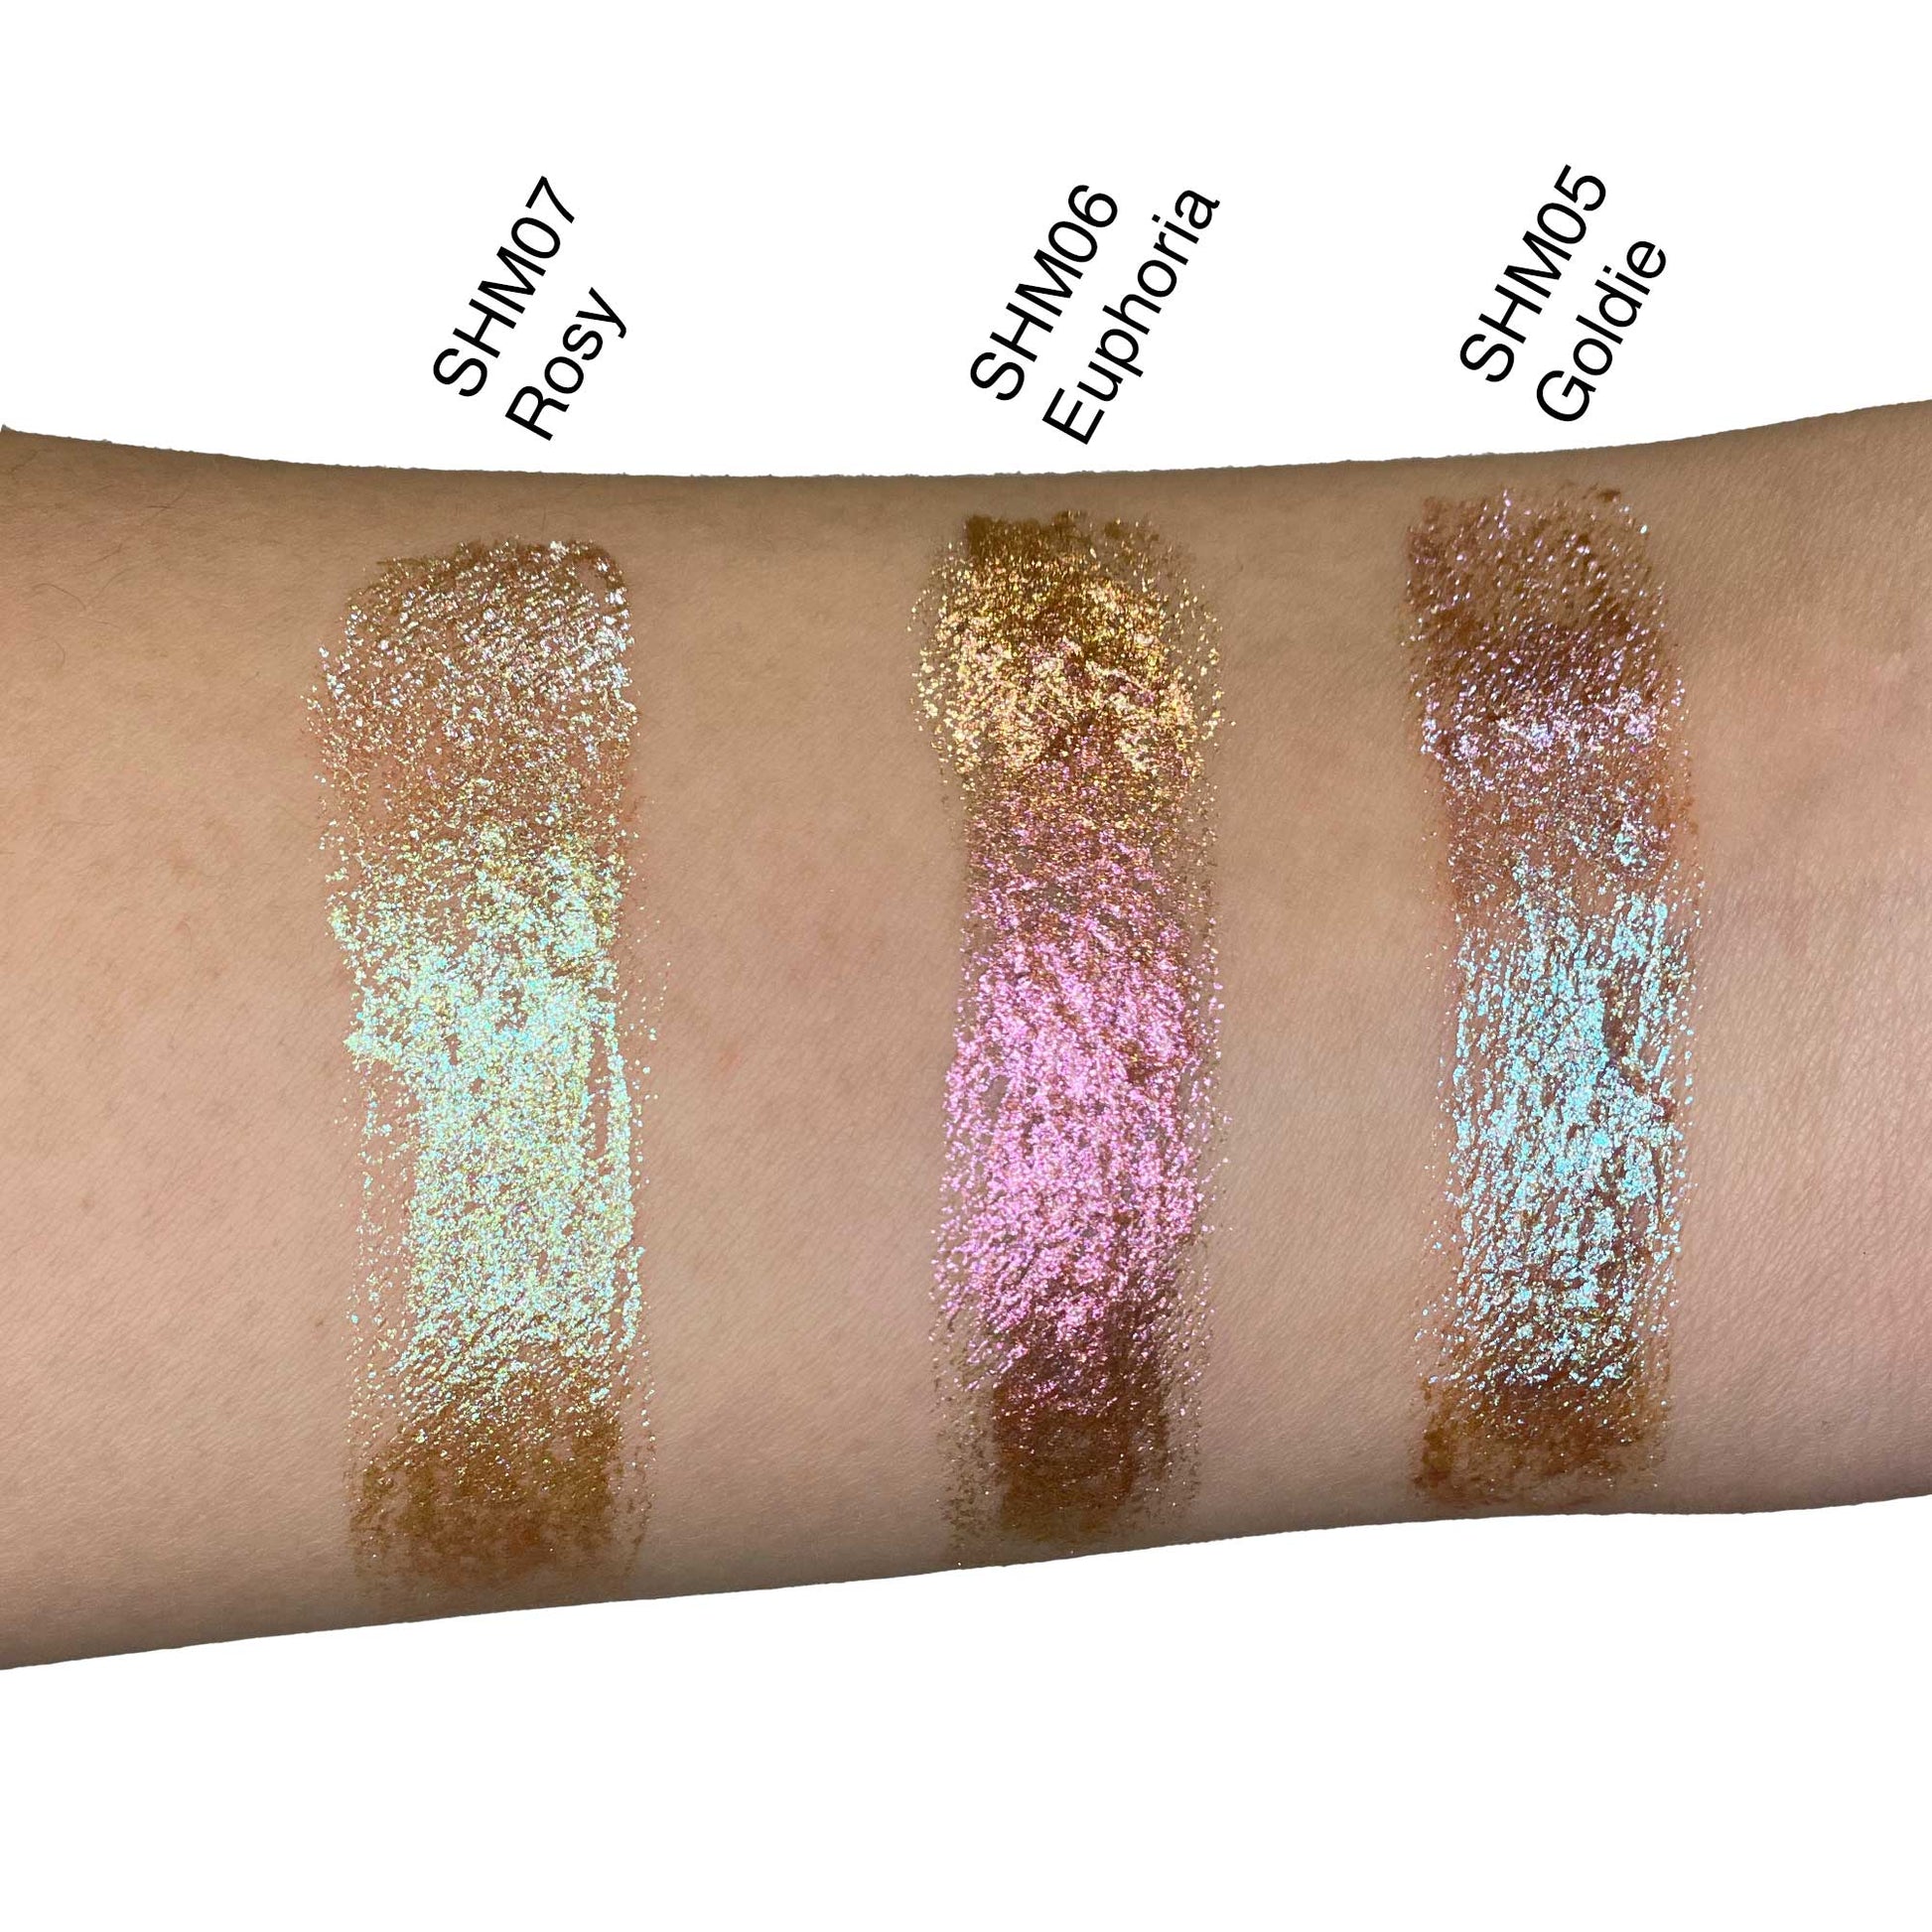 Cruisin Organics Euphoria Liquid Shimmer. This high-impact shine is versatile and crease-proof, perfect for adding dazzling highlights to your lips, eyelids, and cheekbones. Mix it with other products or wear it alone for a must-have addition to your routine. Get ready to shine like never before!